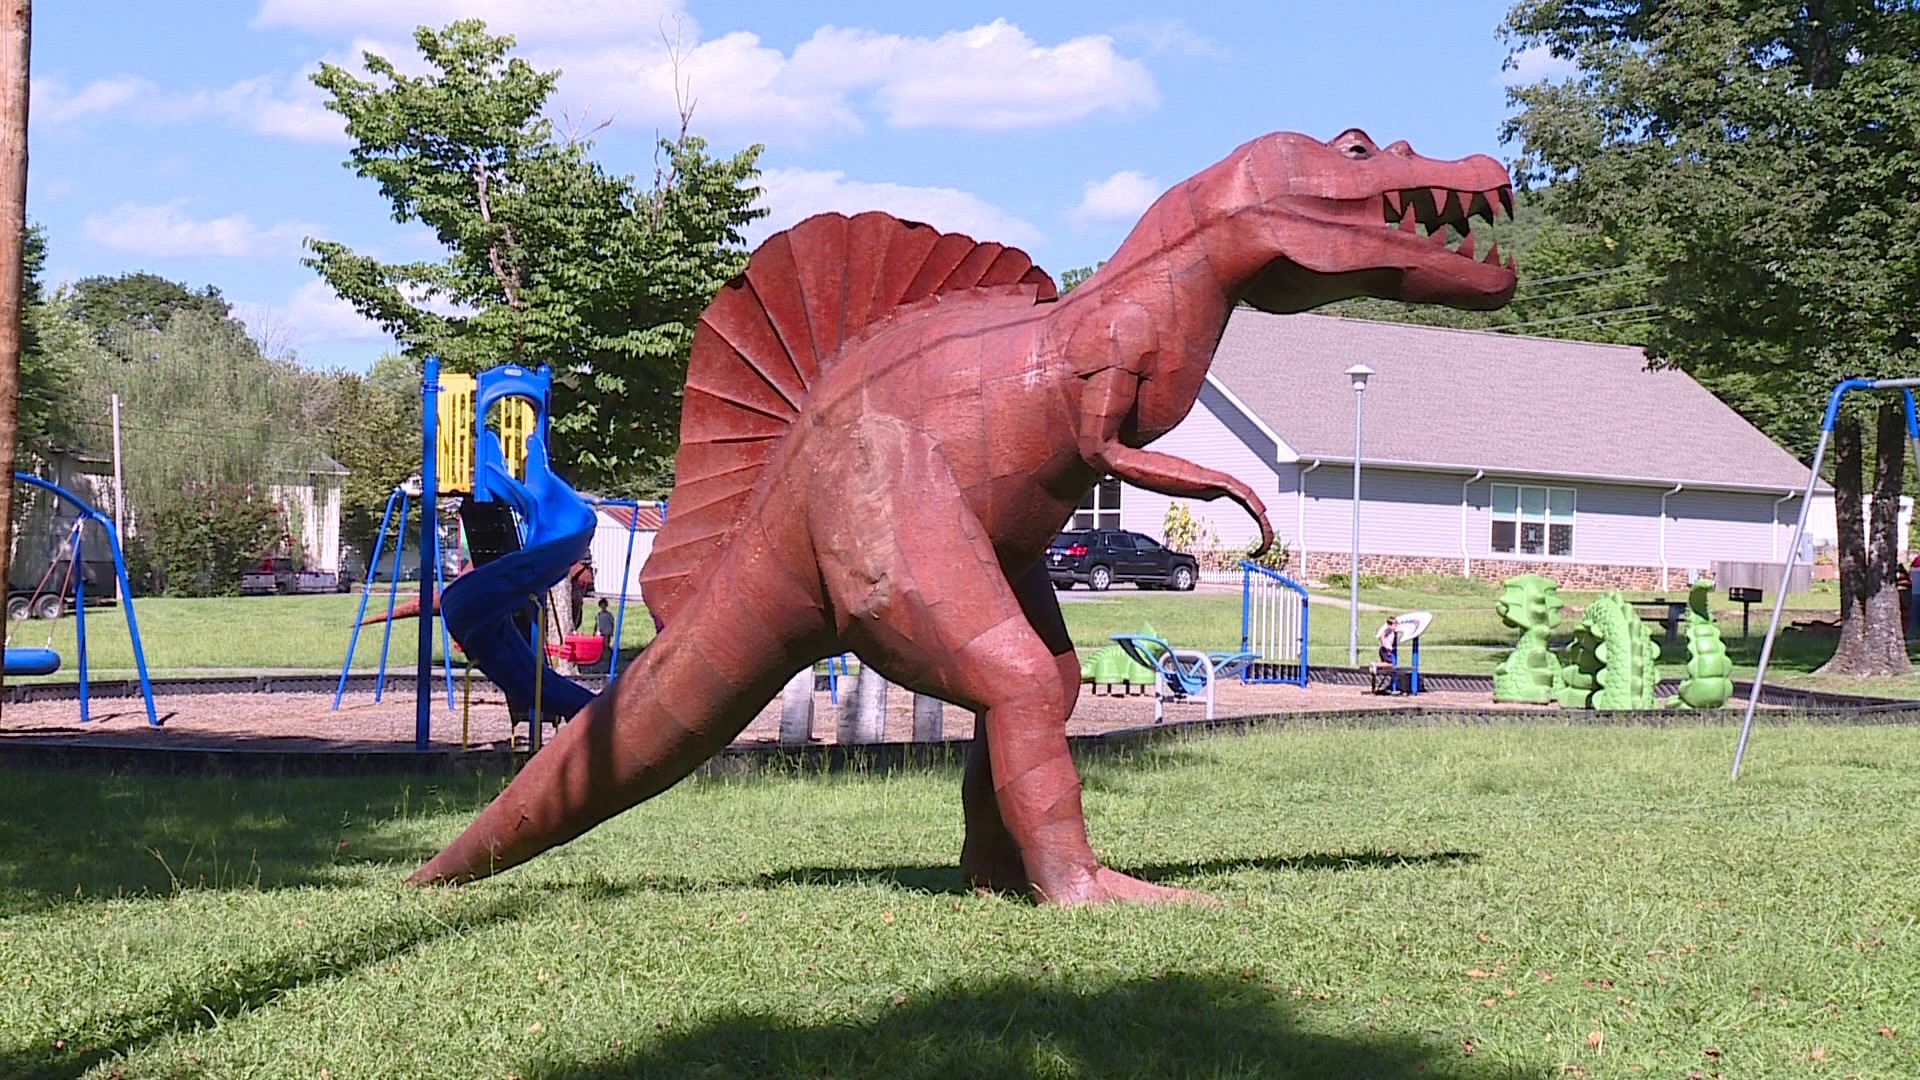 The dinosaurs have been in the park since the 80s.